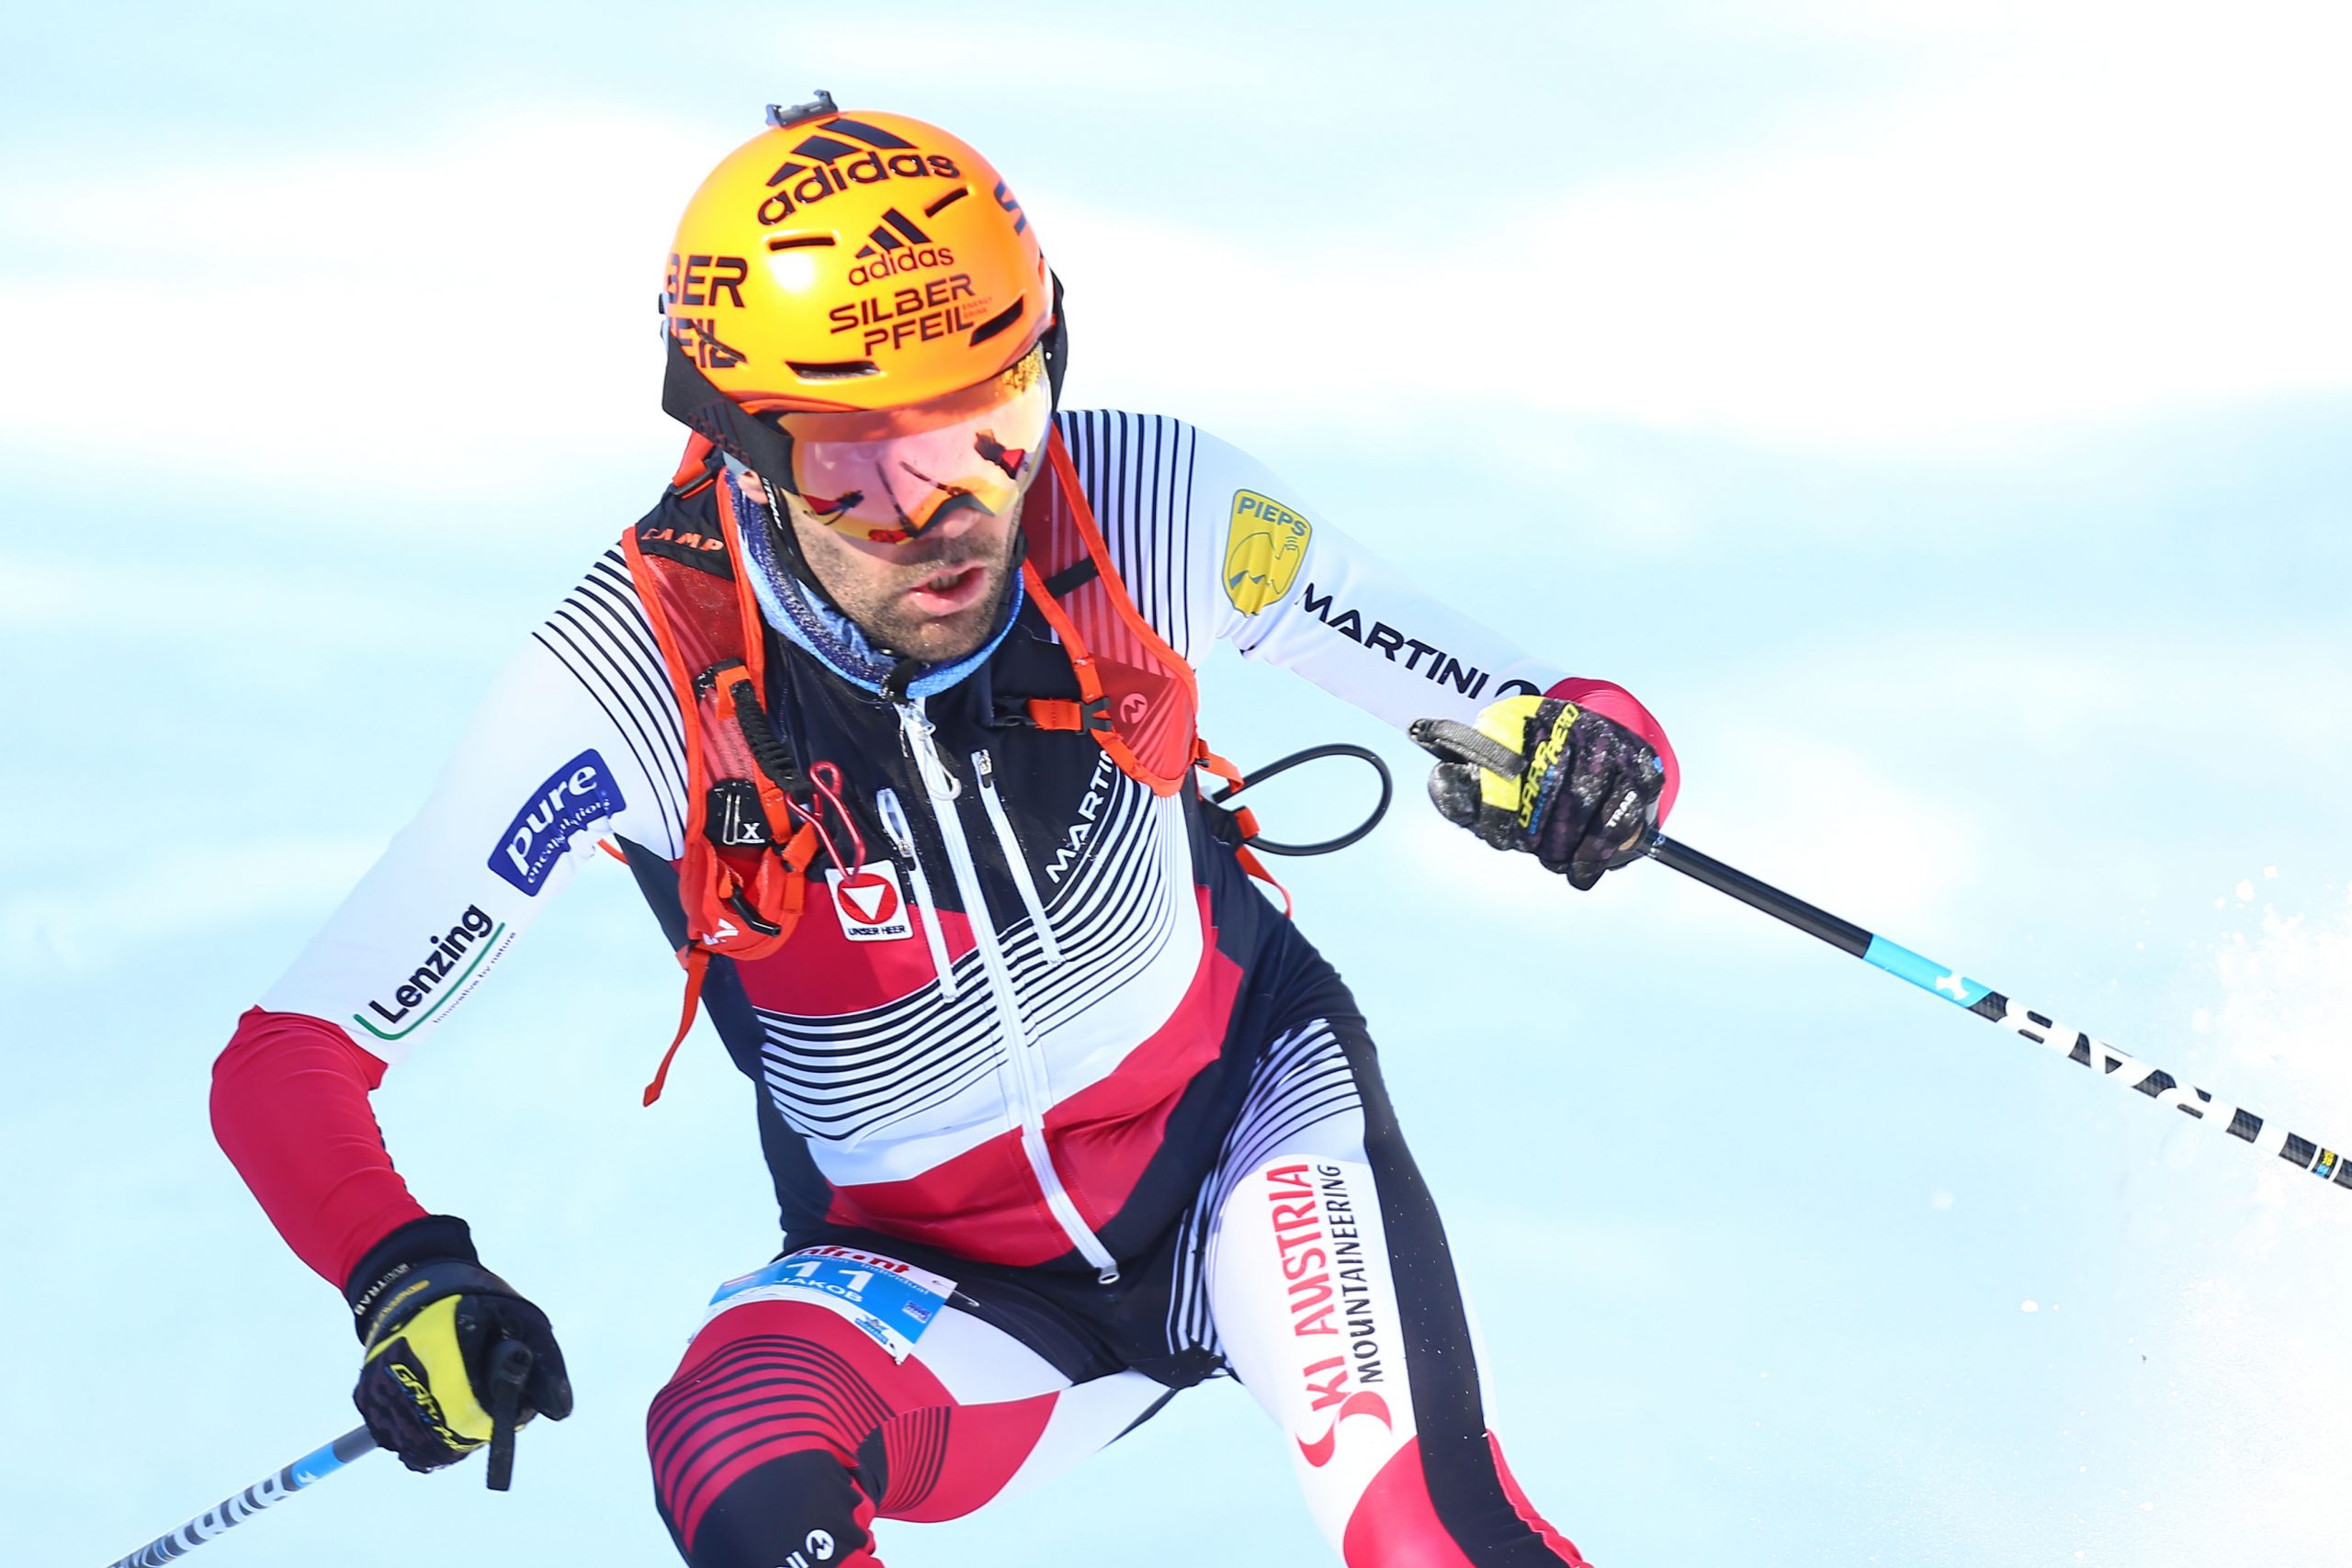 BISCHOFSHOFEN, AUSTRIA - JANUARY 20:  during ISMF World Cup Individual Race on January 20, 2019 in Bischofshofen, Austria.